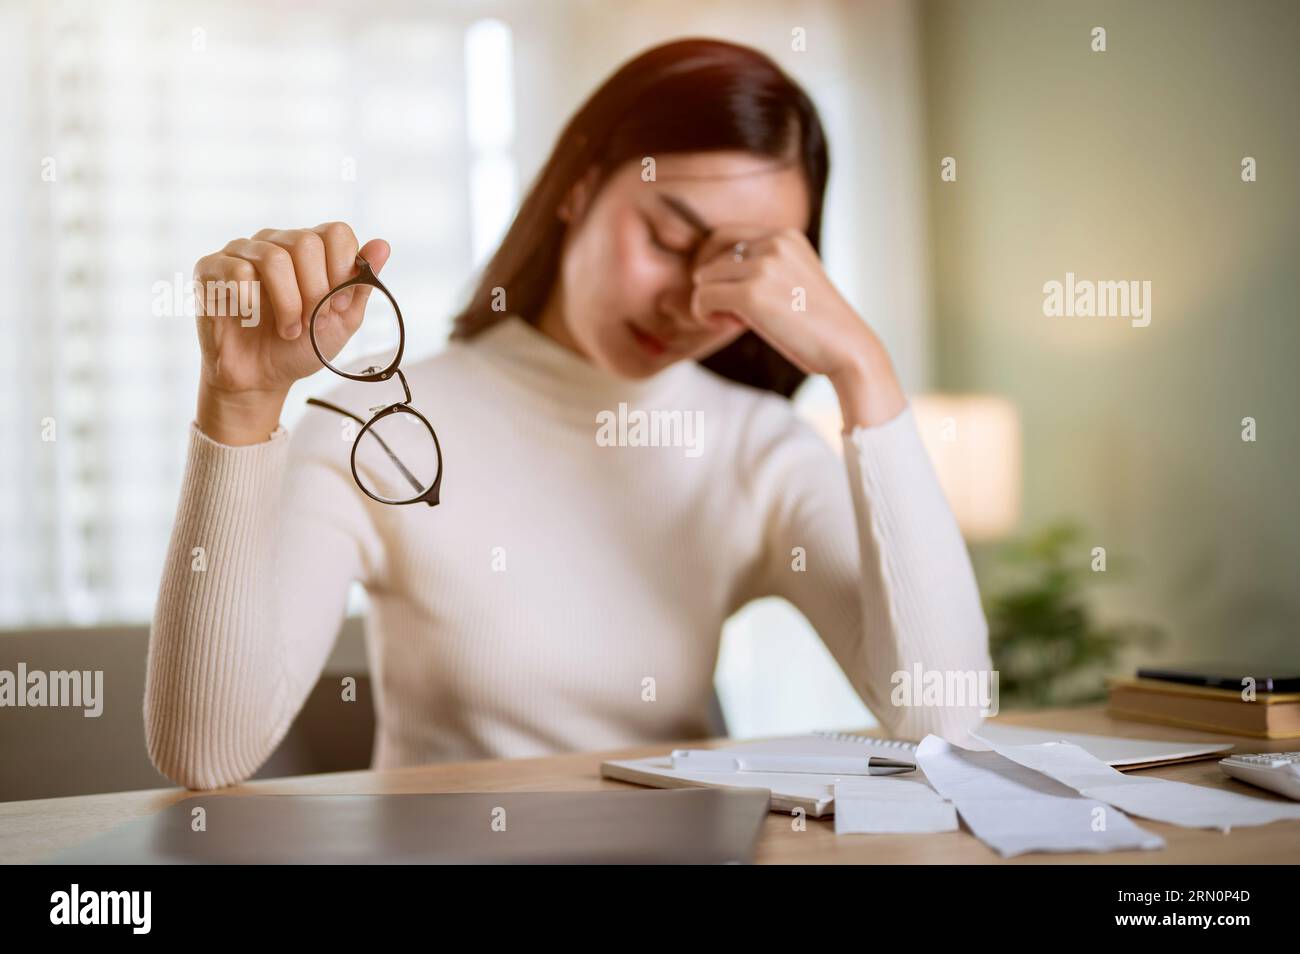 A stressed Asian woman is taking off her glasses while calculating her monthly household expenses and taxes, having headaches, and worried about finan Stock Photo